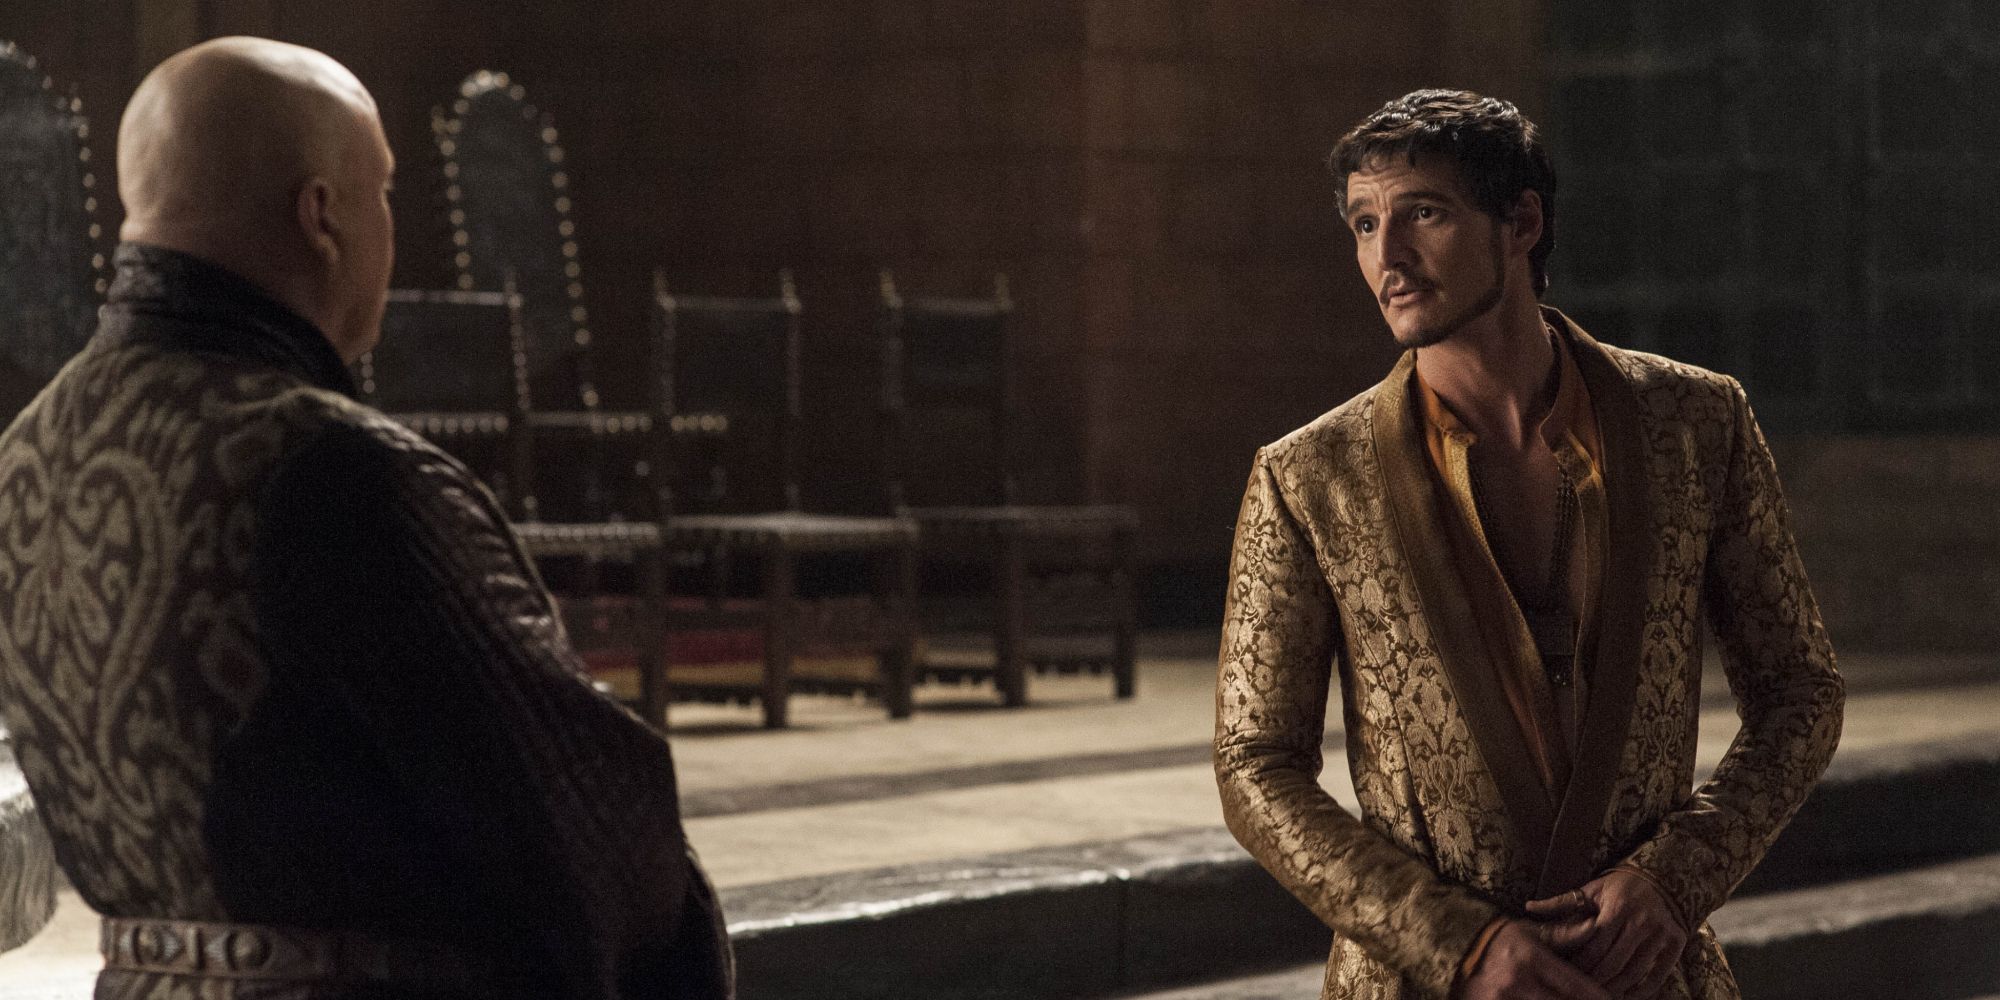 Varys and Oberyn speak in the Throne Room in Game of Thrones